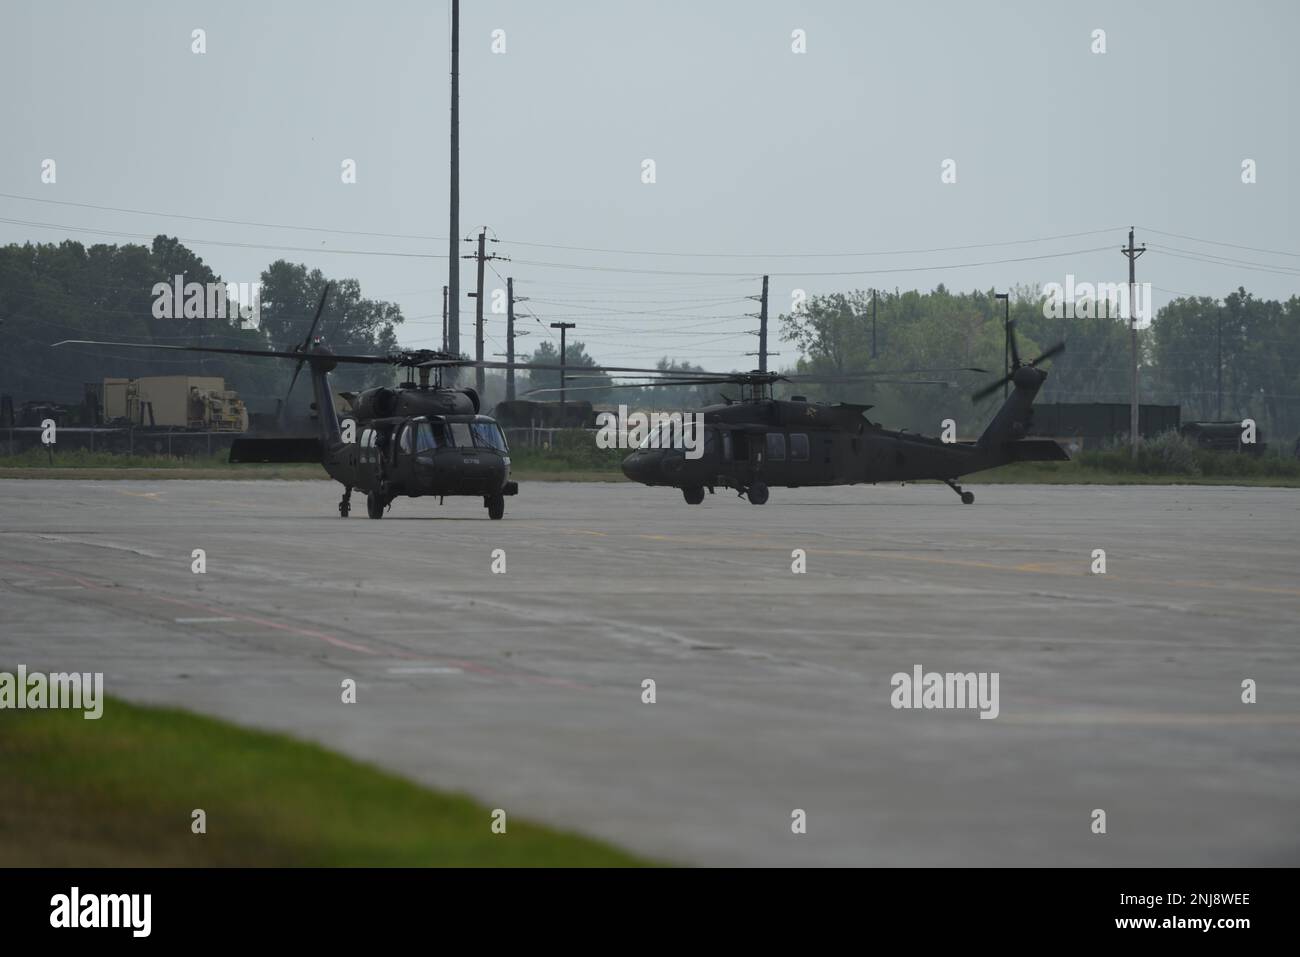 U.S. Army National Guard UH-60 Blackhawks taxi down the flight line at the 185th Air Refueling Wing at Sioux City, Iowa, August 6, 2022. The Blackhawks transported members of the Iowa Army and Air National Guard to the 185th ARW for the unit’s Change of Command ceremony. Stock Photo